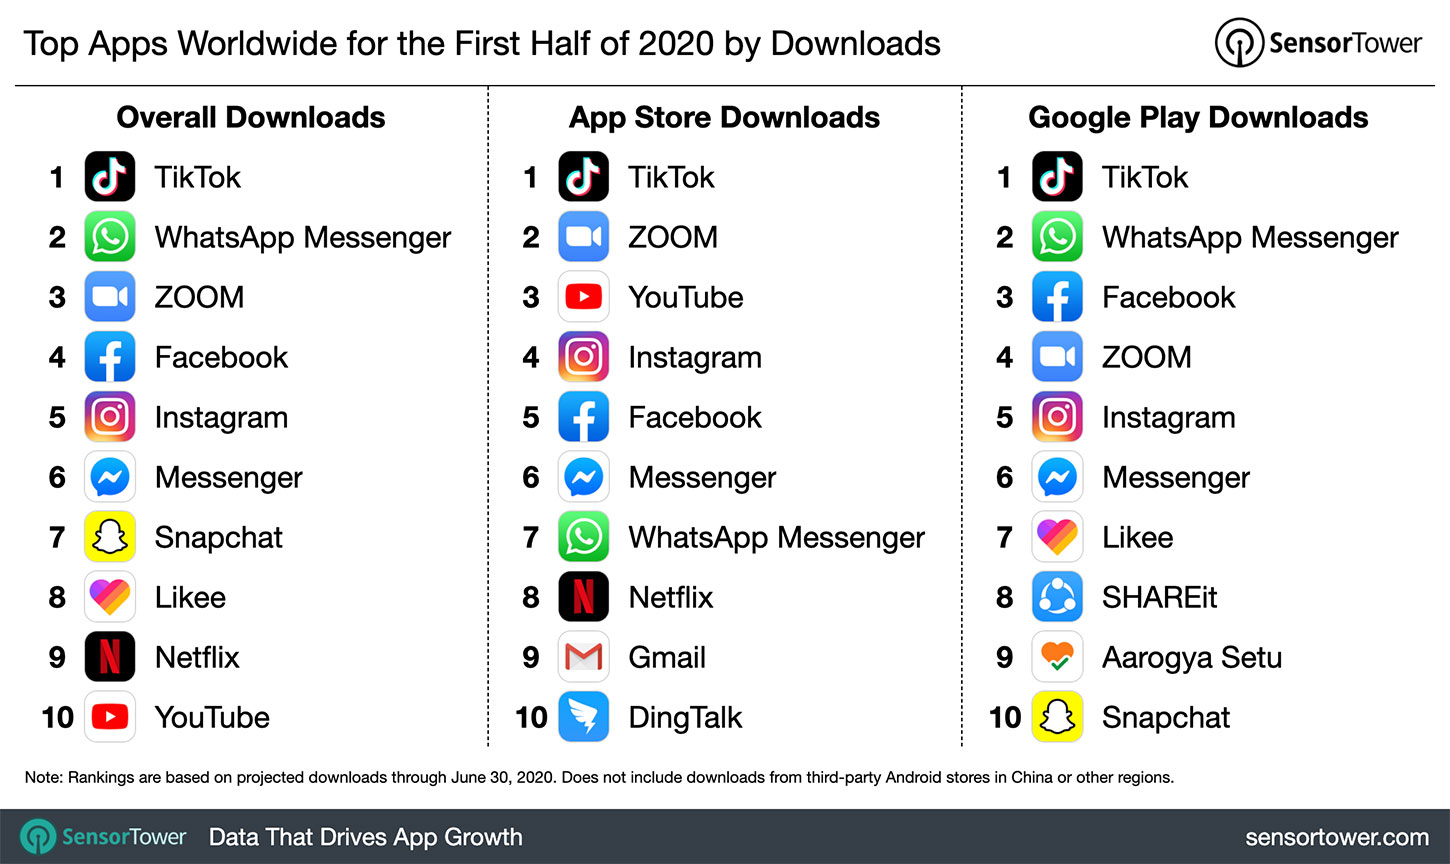 1H 2020 Most Downloaded Apps Worldwide